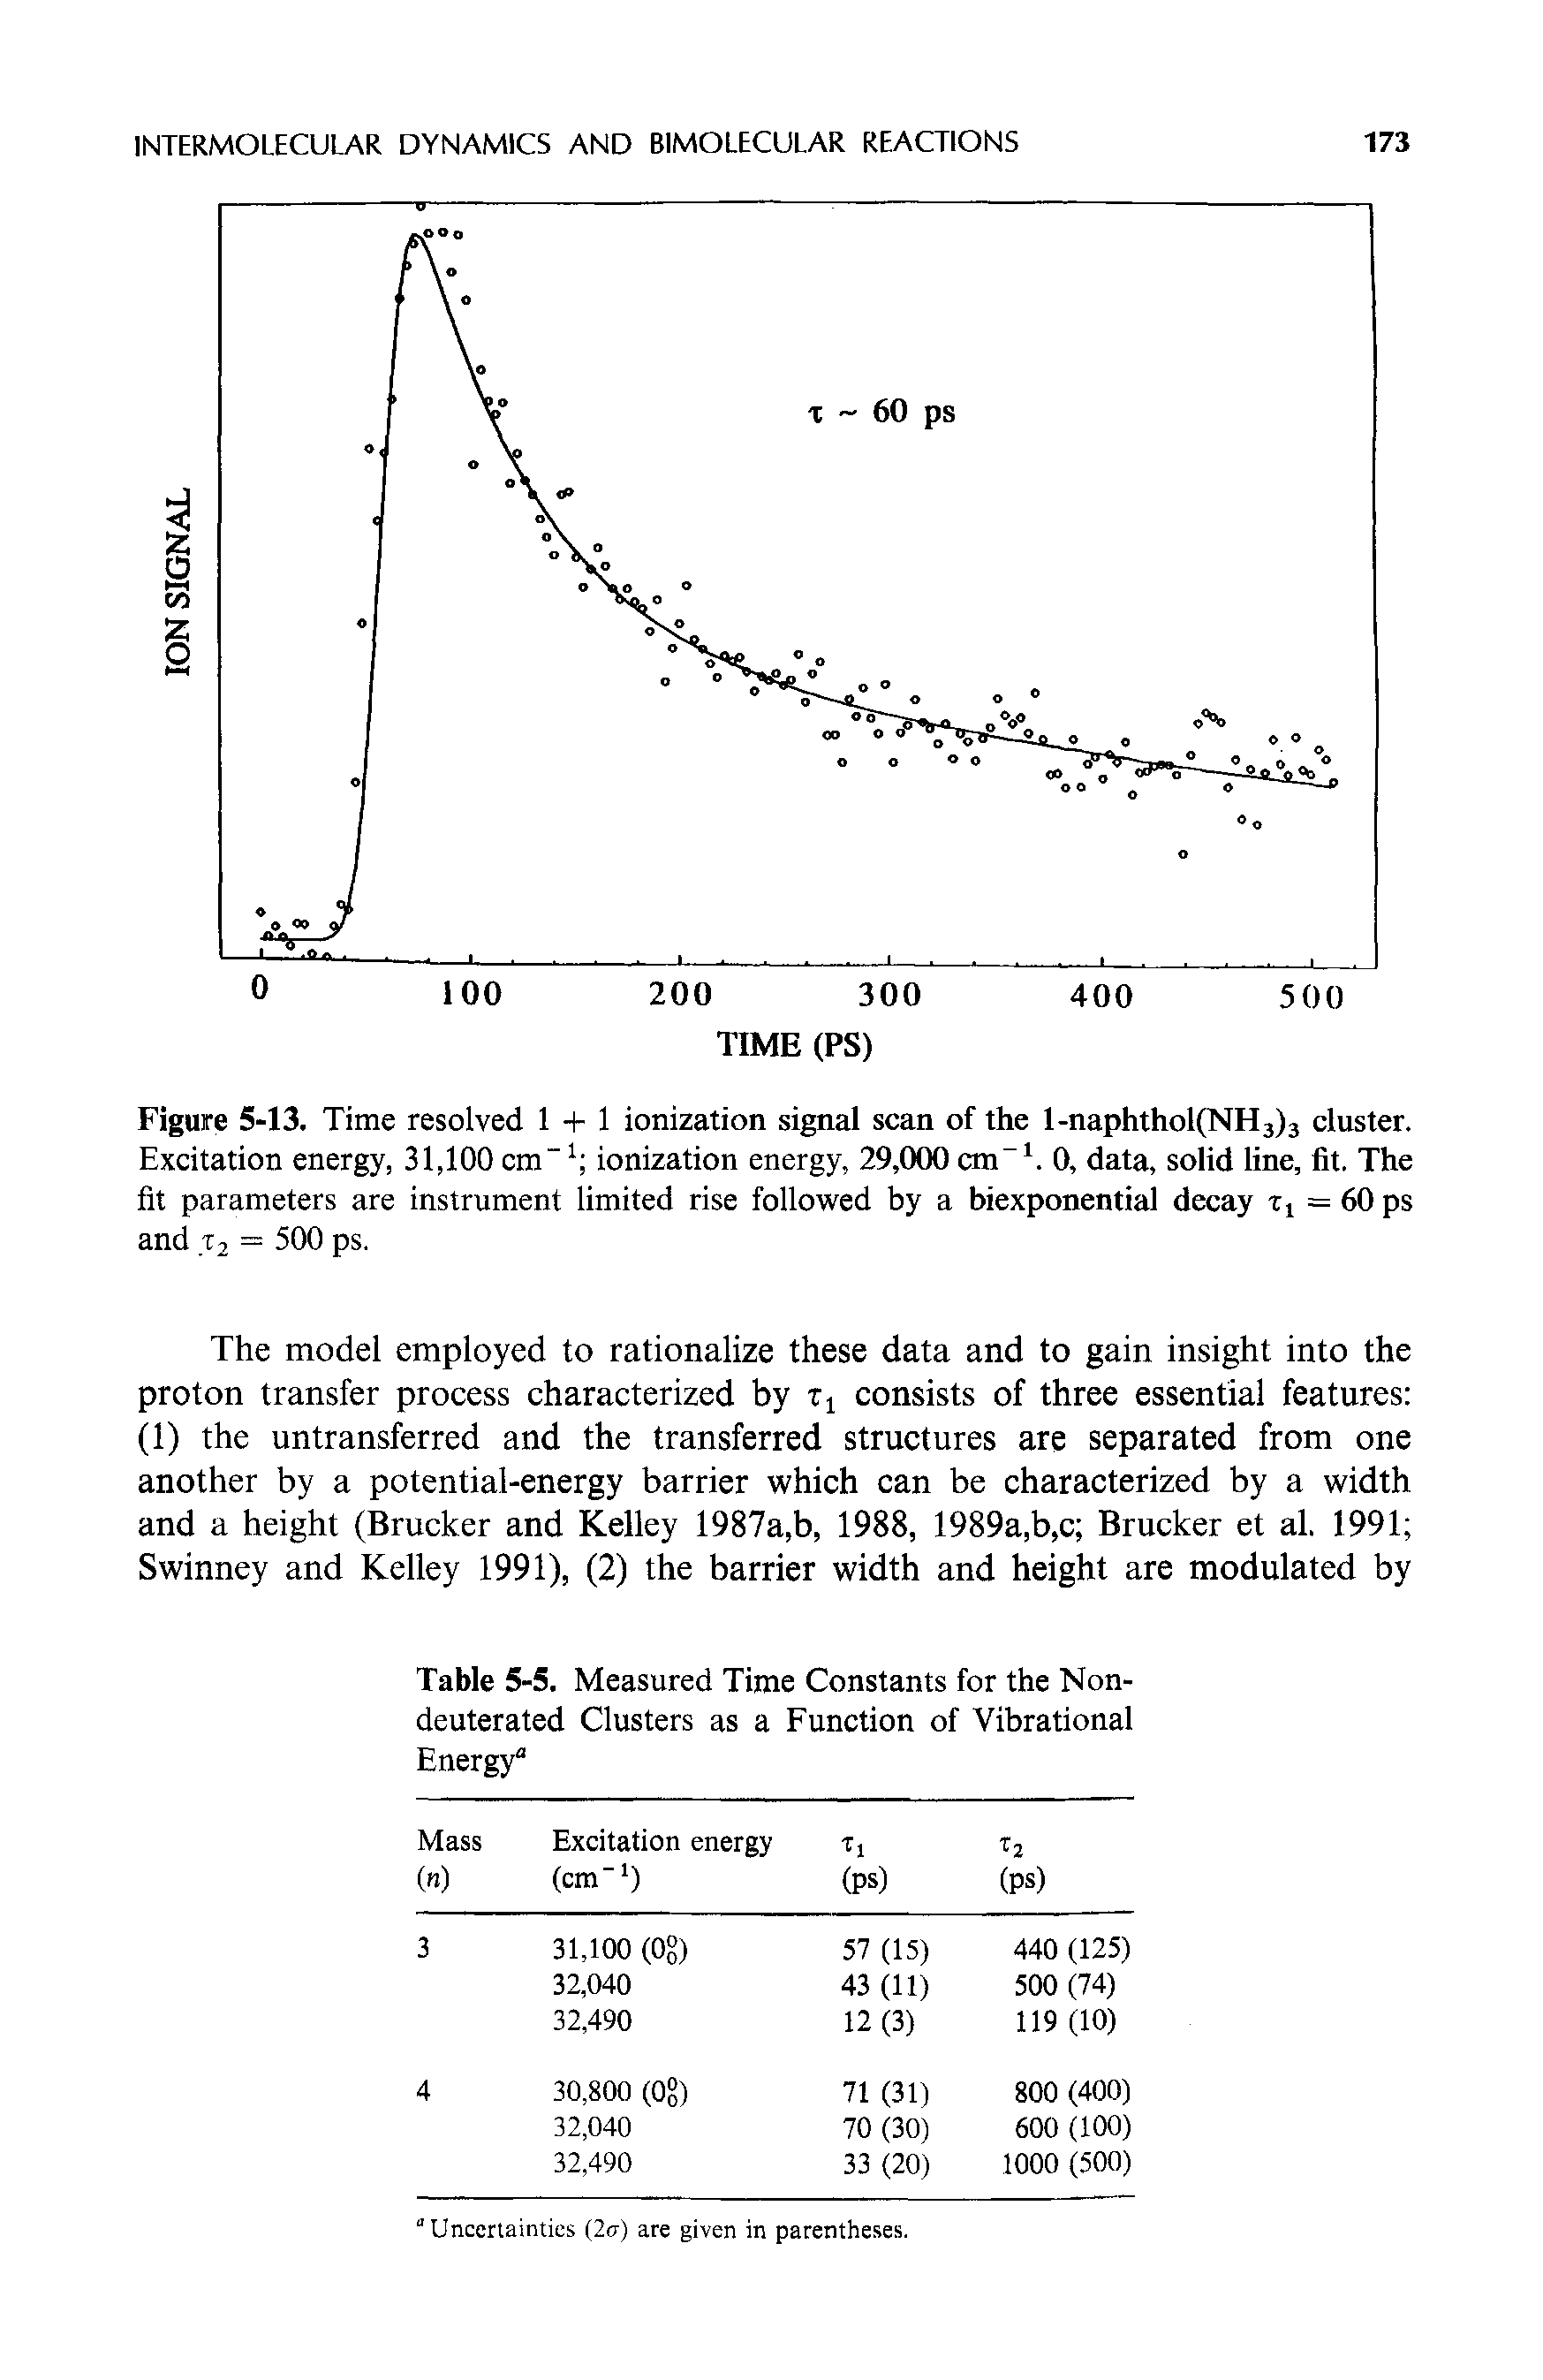 Figure 5-13. Time resolved 1 + 1 ionization signal scan of the l-naphthol(NH3)3 cluster. Excitation energy, 31,100 cm" ionization energy, 29,000 cm-1. 0, data, solid line, fit. The fit parameters are instrument limited rise followed by a biexponential decay = 60 ps and r2 = 500 ps.